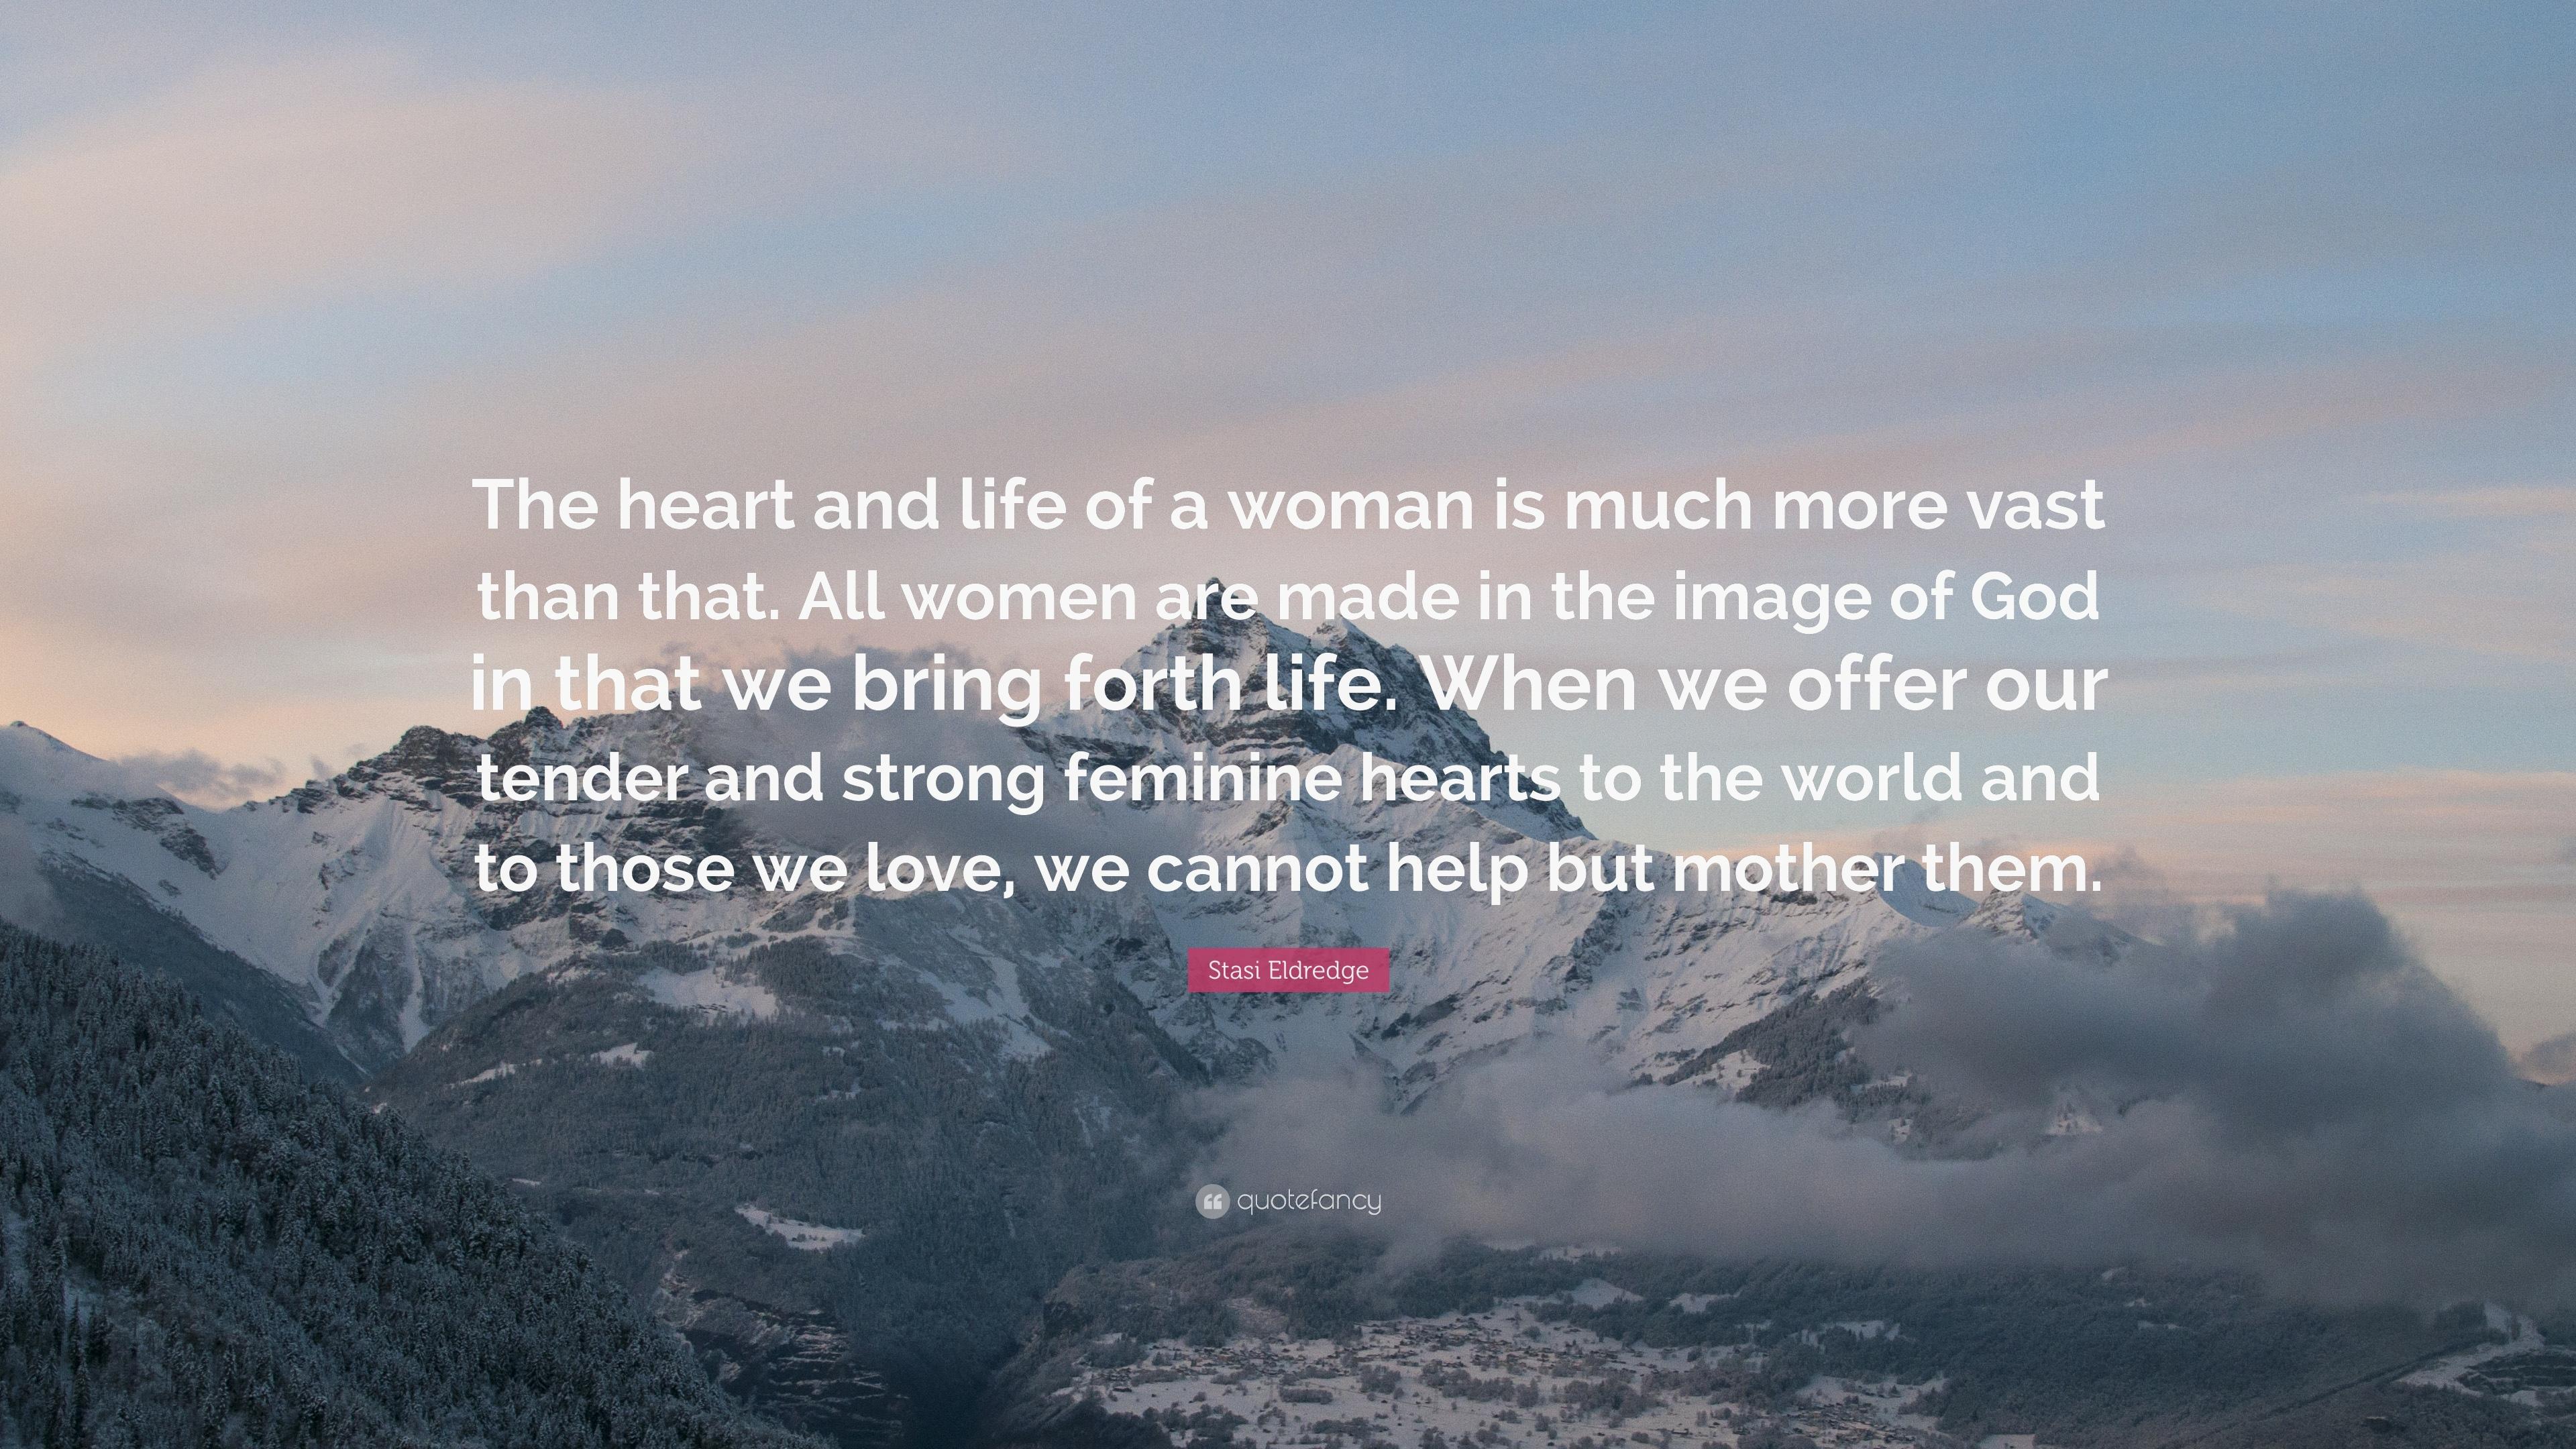 Stasi Eldredge Quote: “The heart and life of a woman is much more